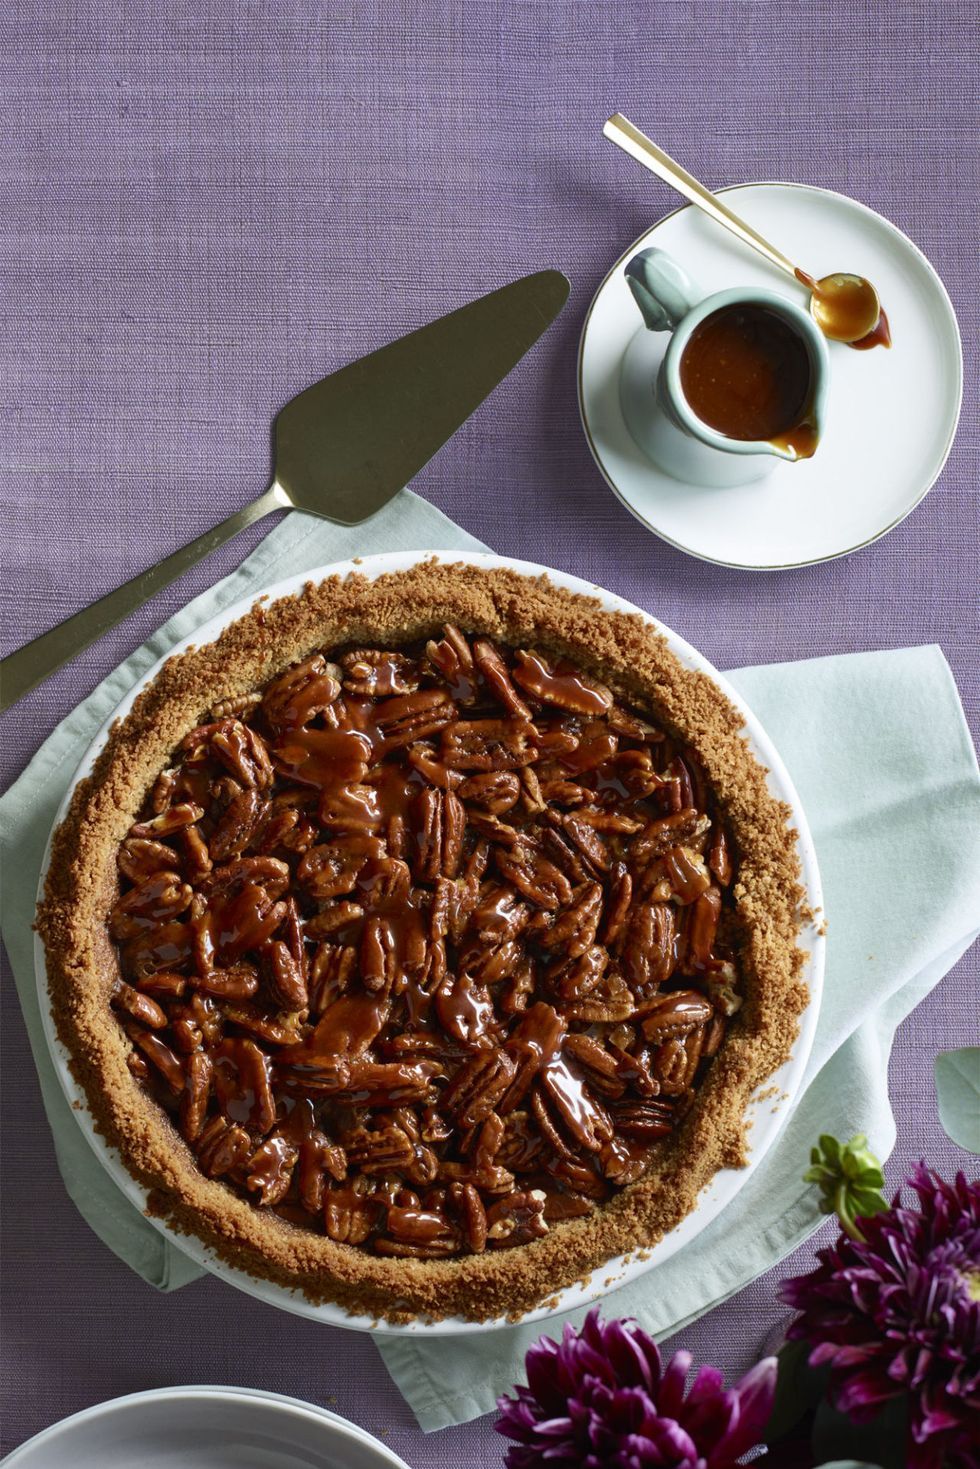 tempting chocolate chip recipes - pecan and chocolate pie